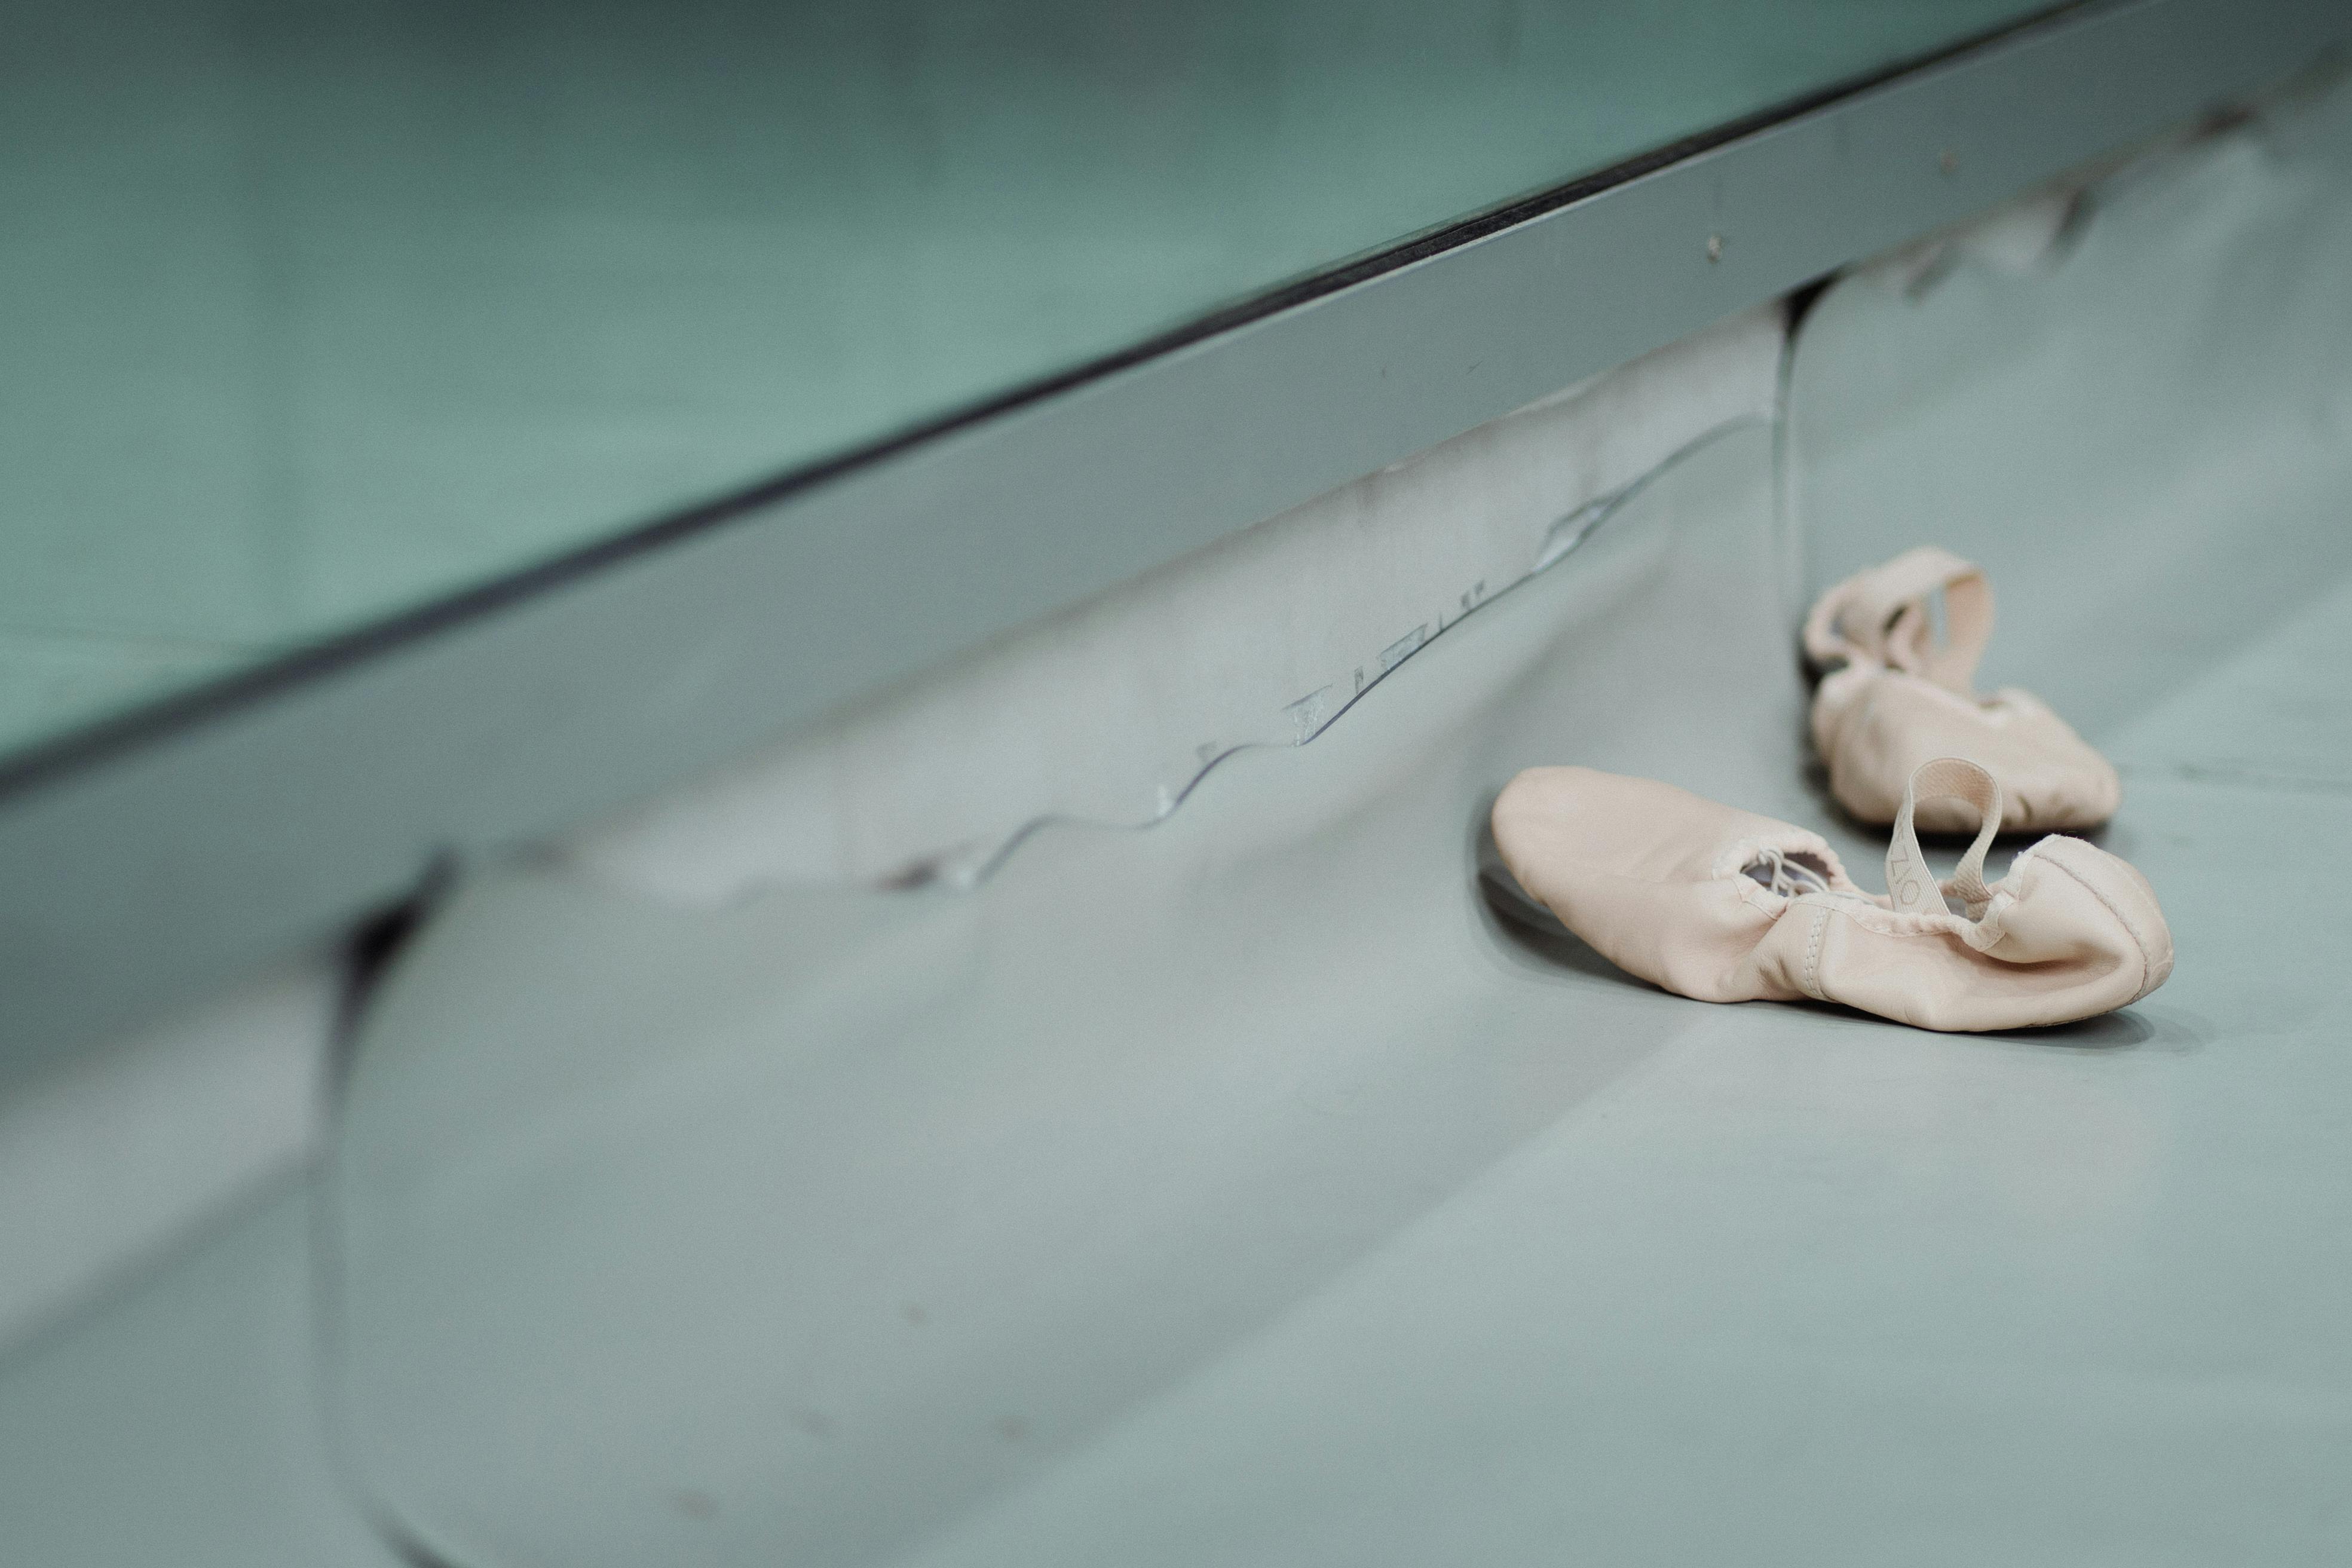 pointe shoes placed on floor in dance room